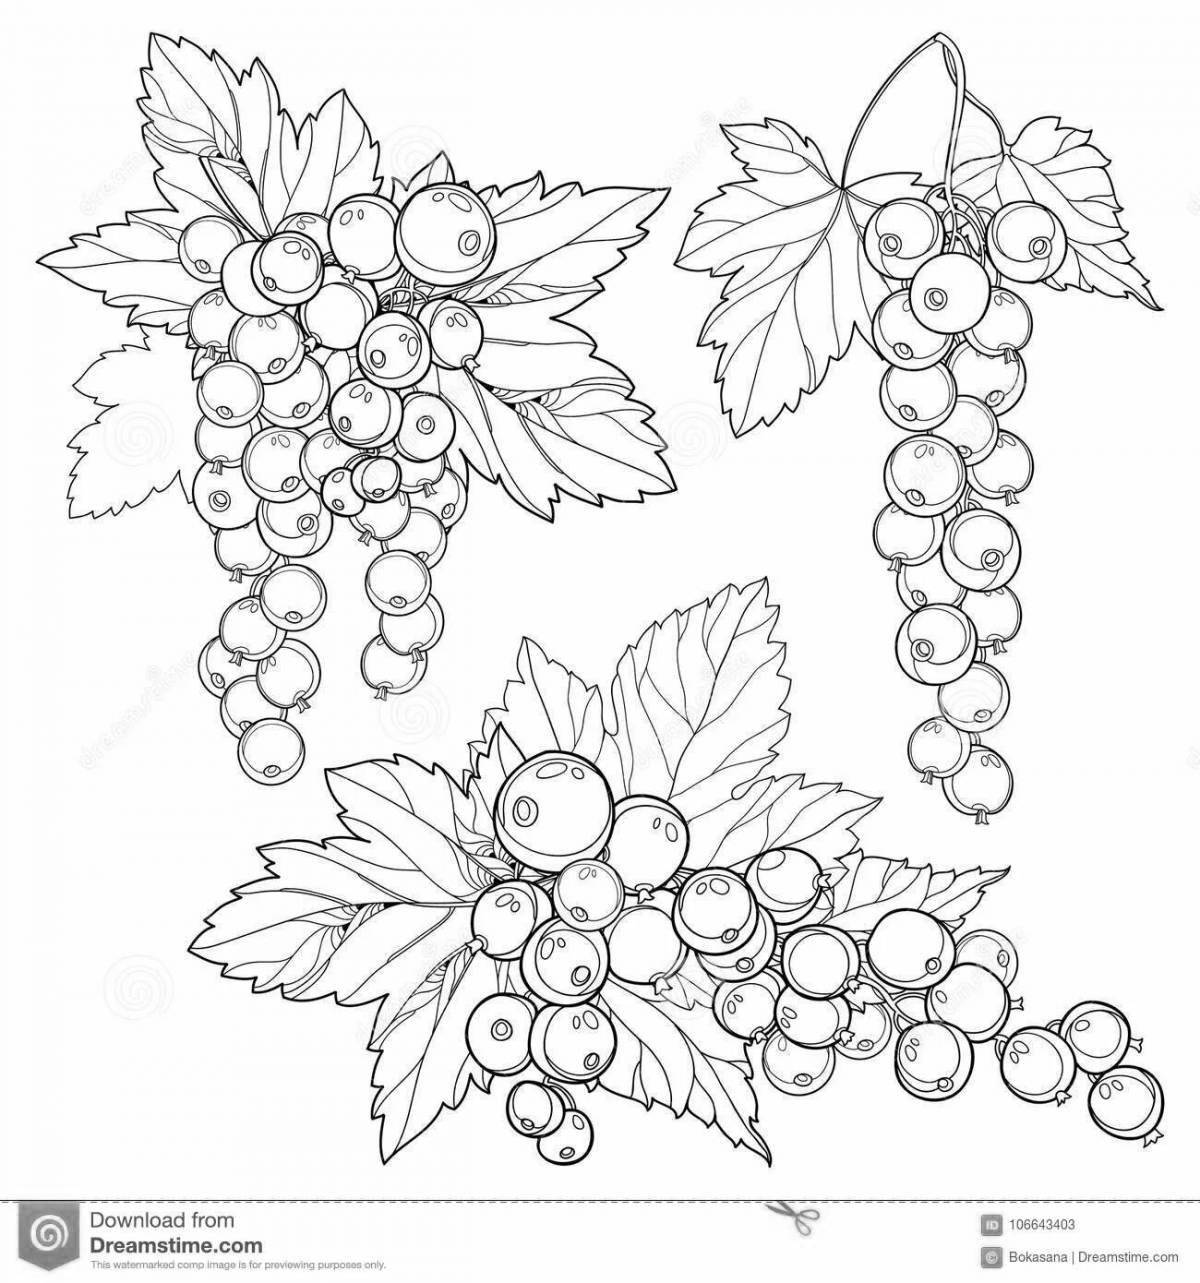 Coloring book sparkling currant for the little ones